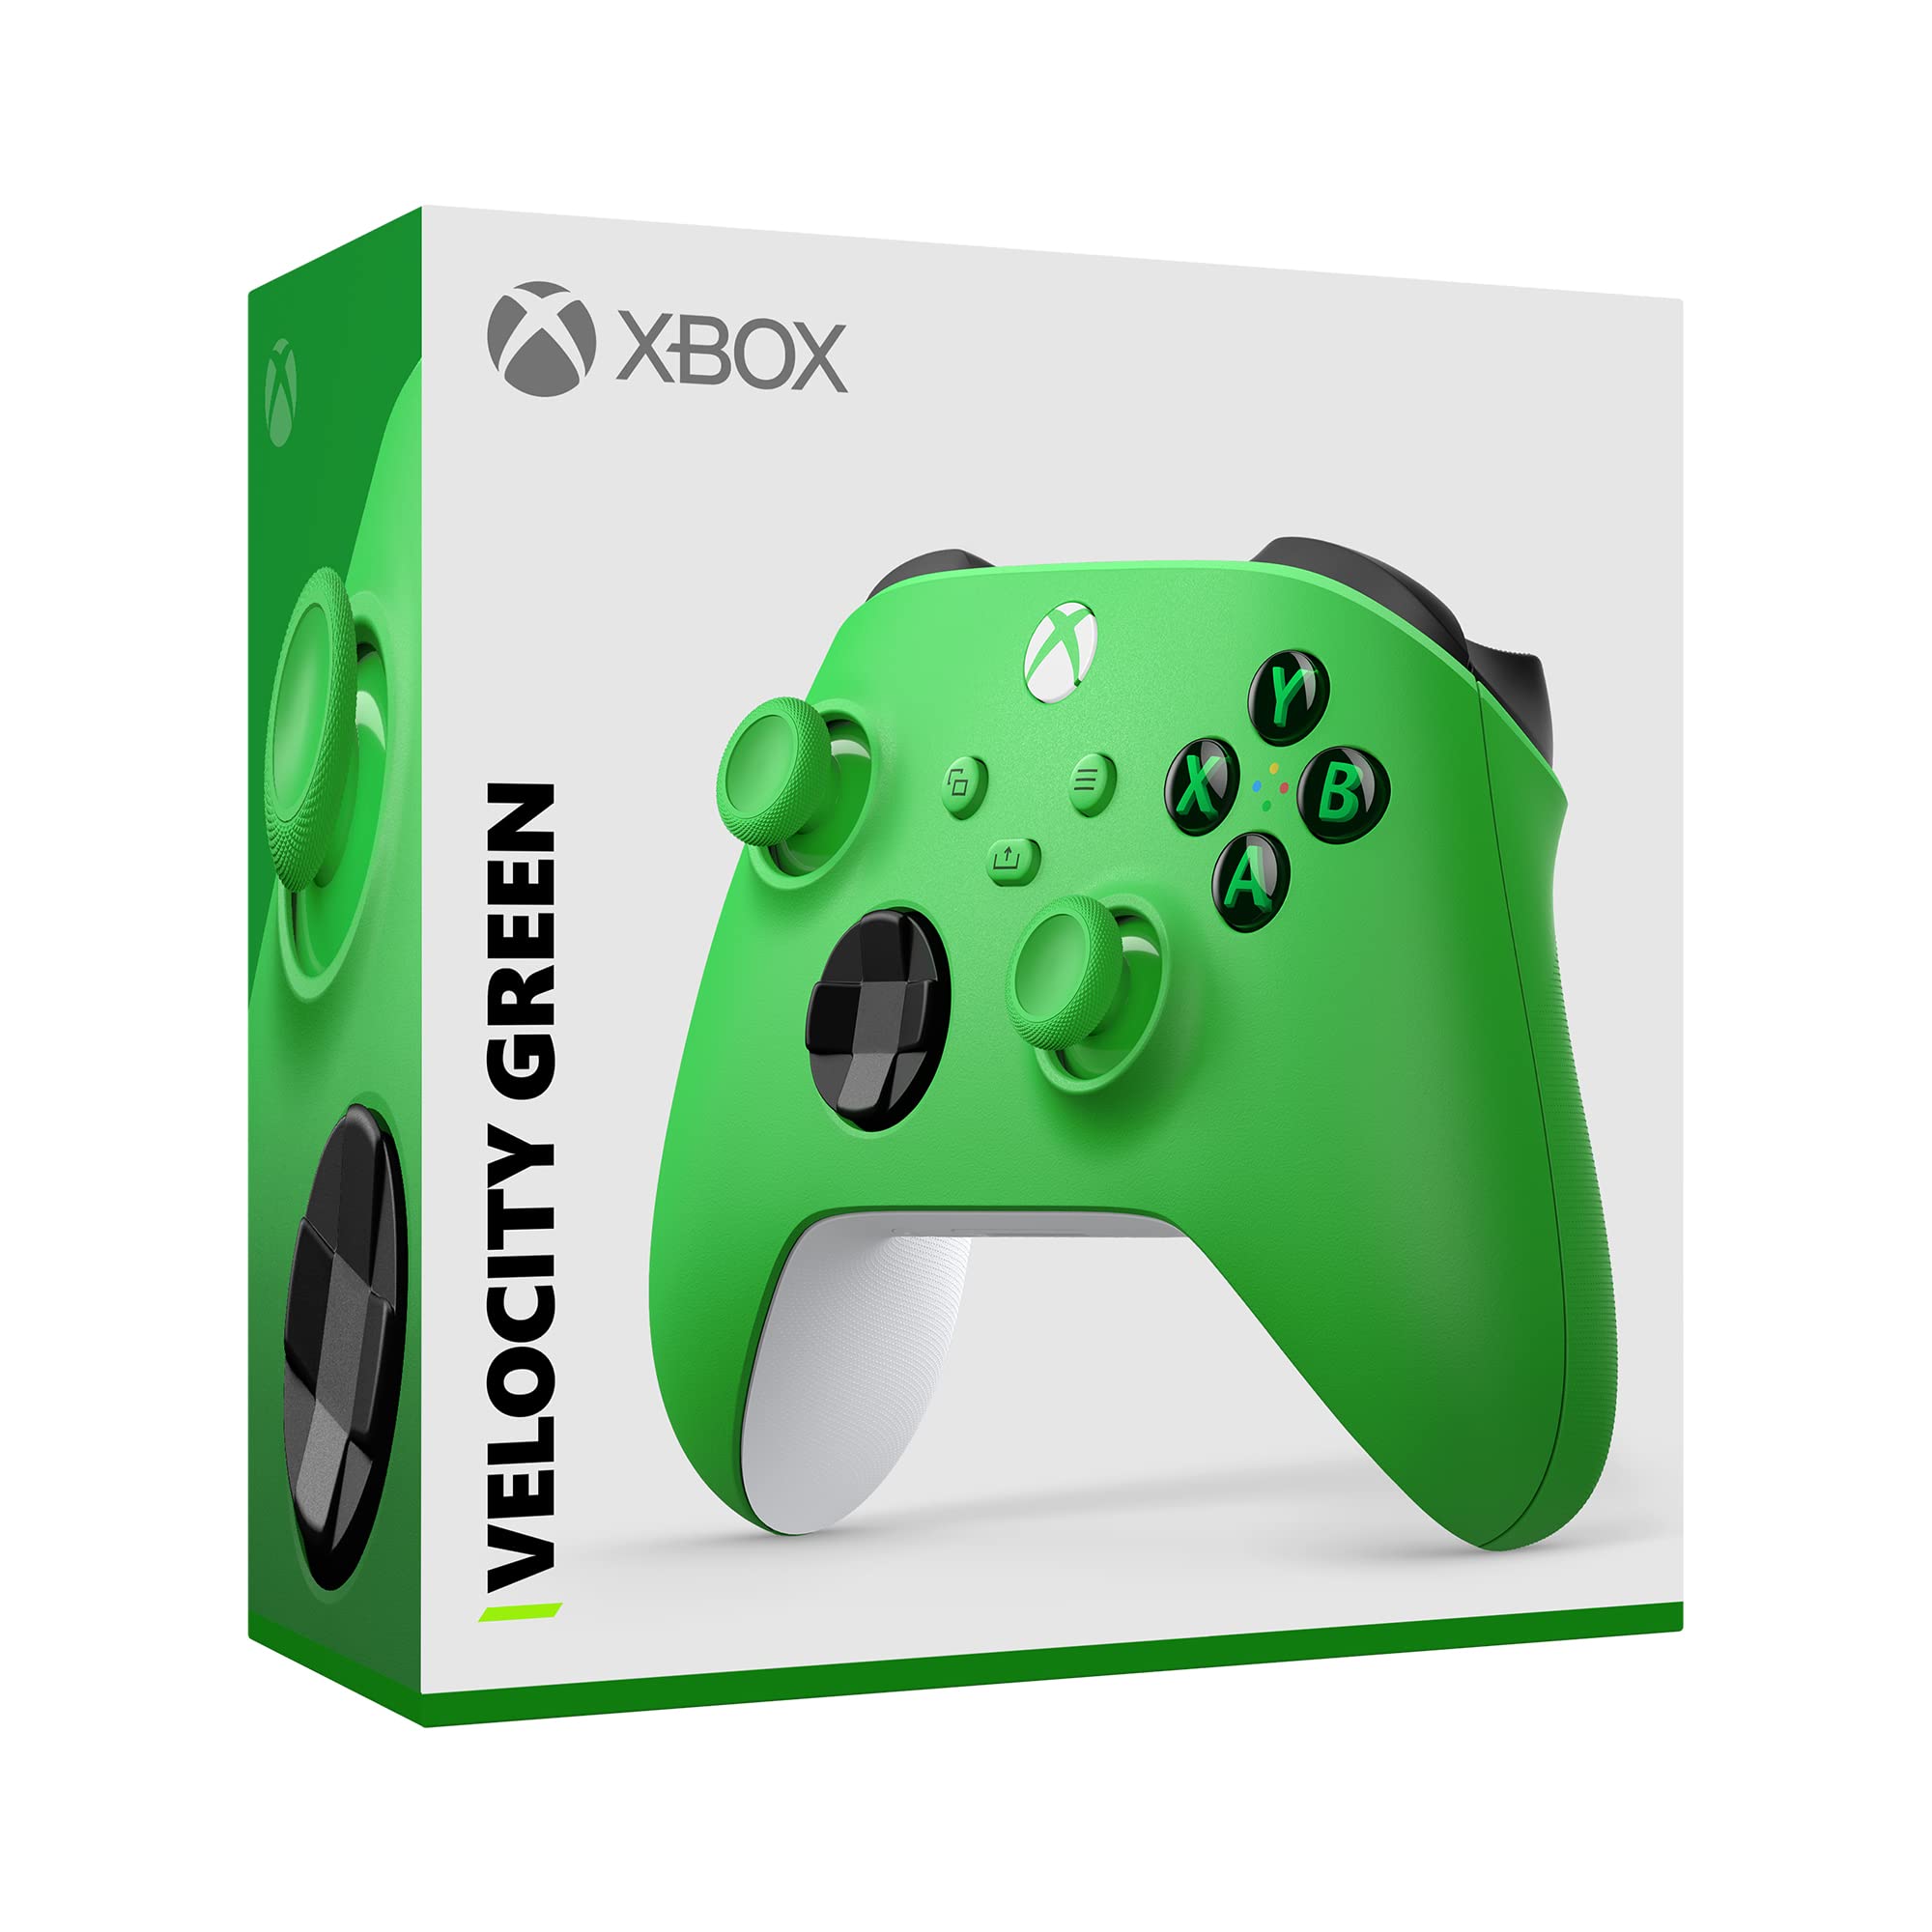 Xbox Wireless Controller – Velocity Green For Xbox Series X|S, Xbox One, And Windows Devices